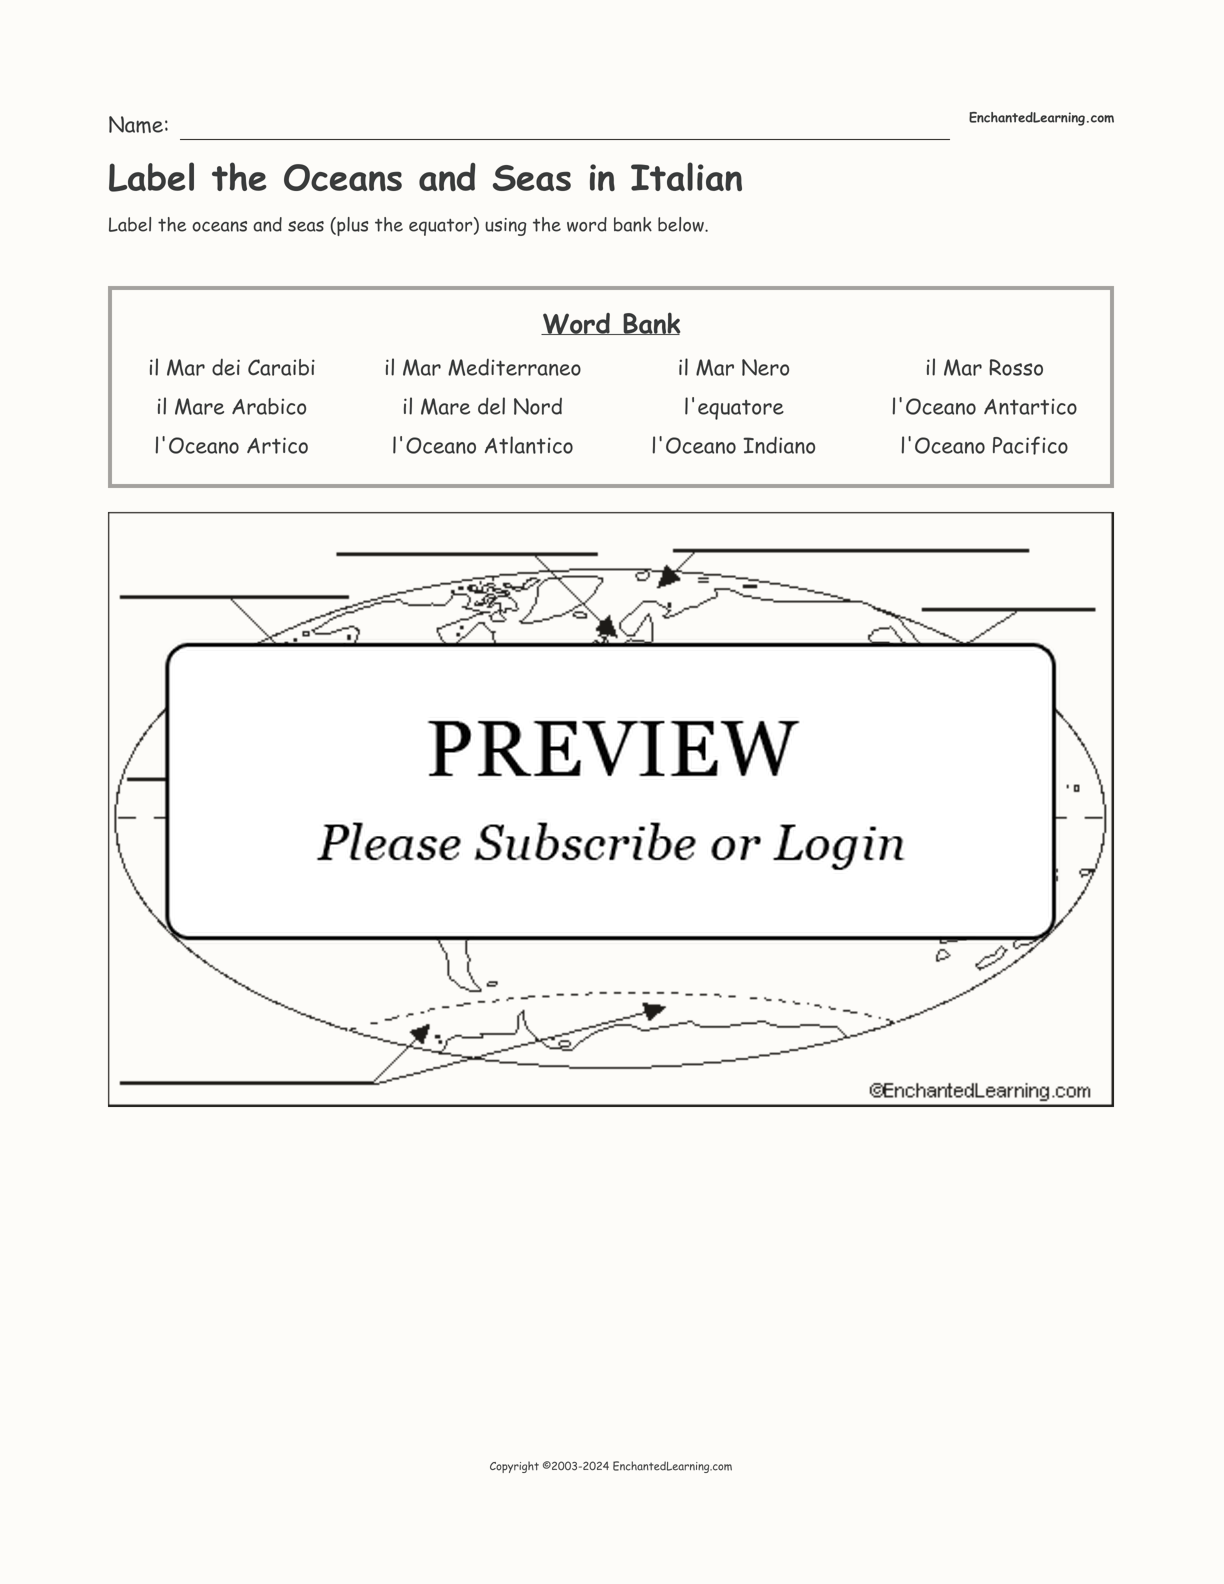 Label the Oceans and Seas in Italian interactive worksheet page 1